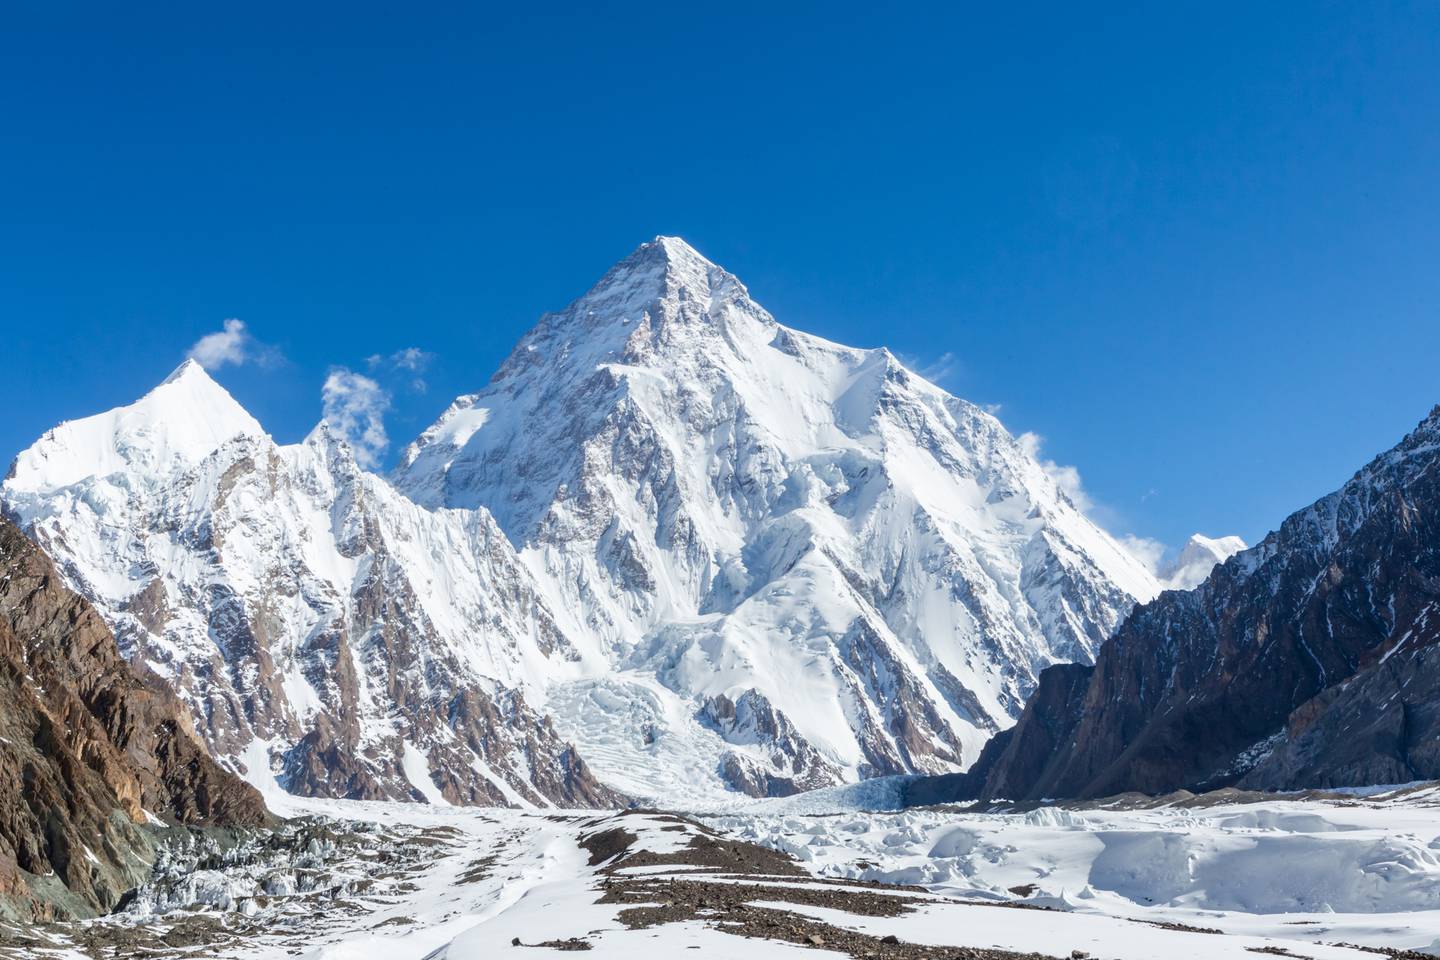 K2 is the second-highest mountain in the world.